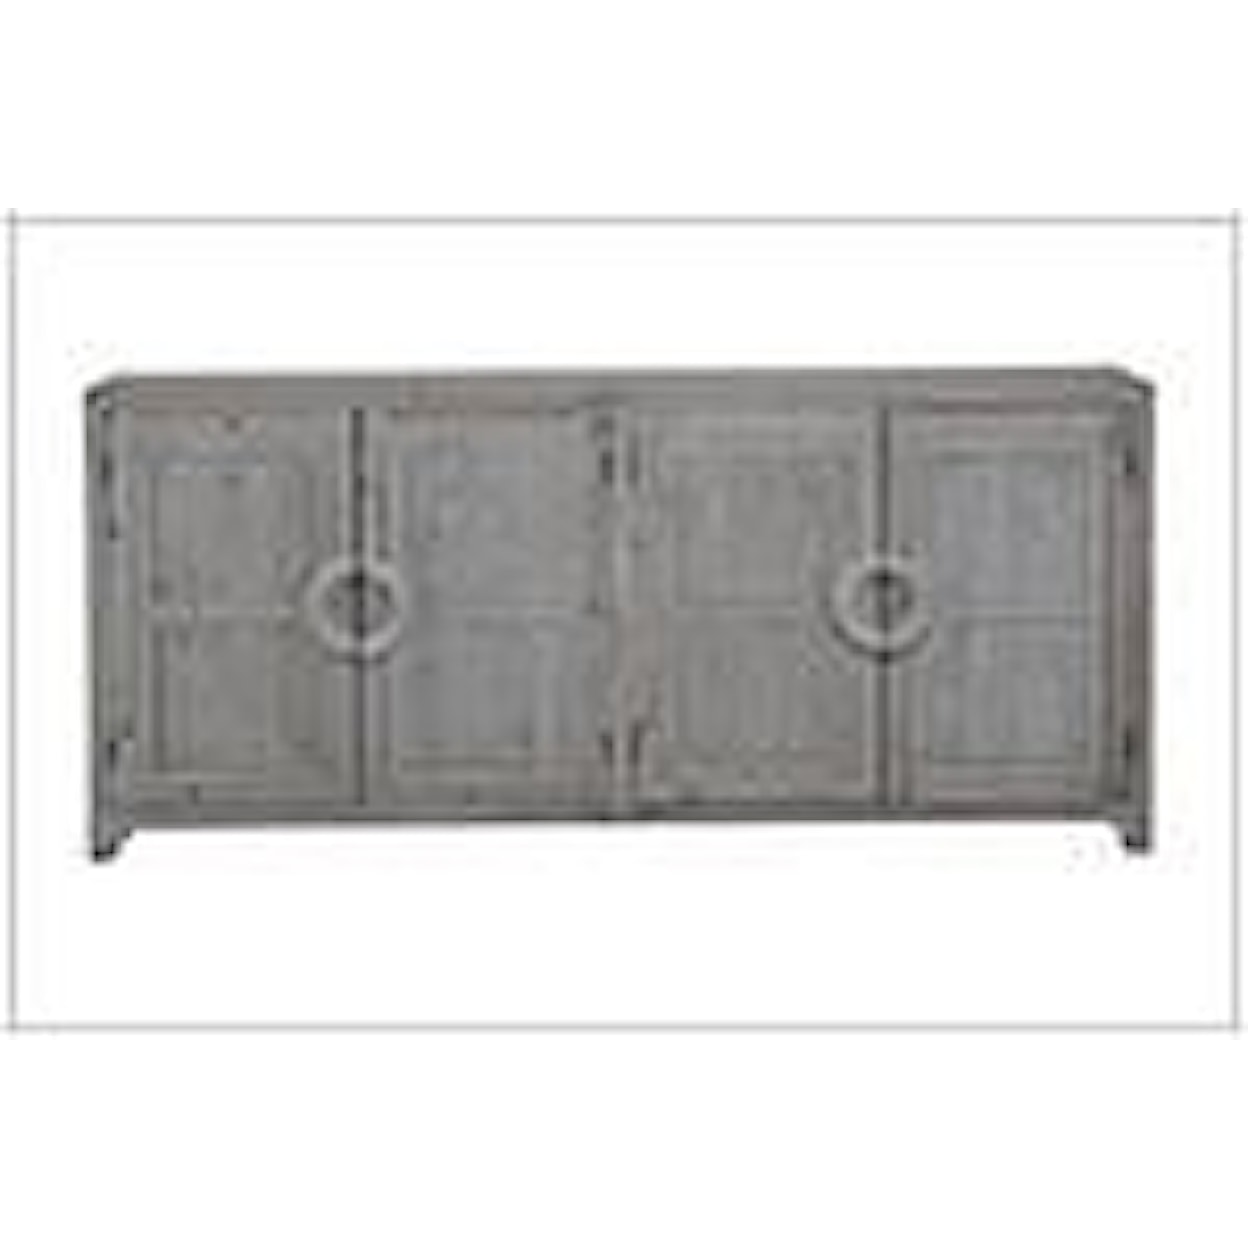 Dovetail Furniture Sideboards/Buffets Cordova Sideboard